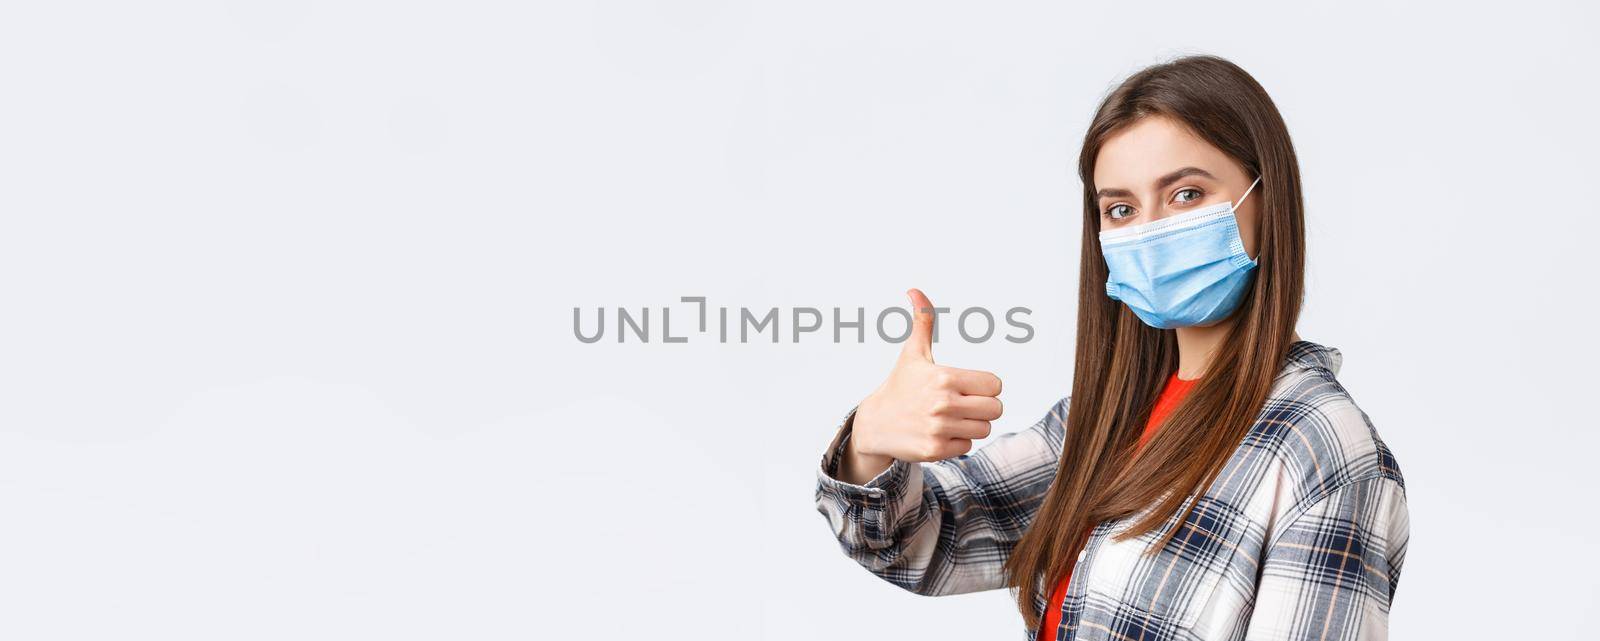 Coronavirus outbreak, leisure on quarantine, social distancing and emotions concept. Cheerful young woman in medical mask stand in profile, turn to camera and thumb-up in approval.